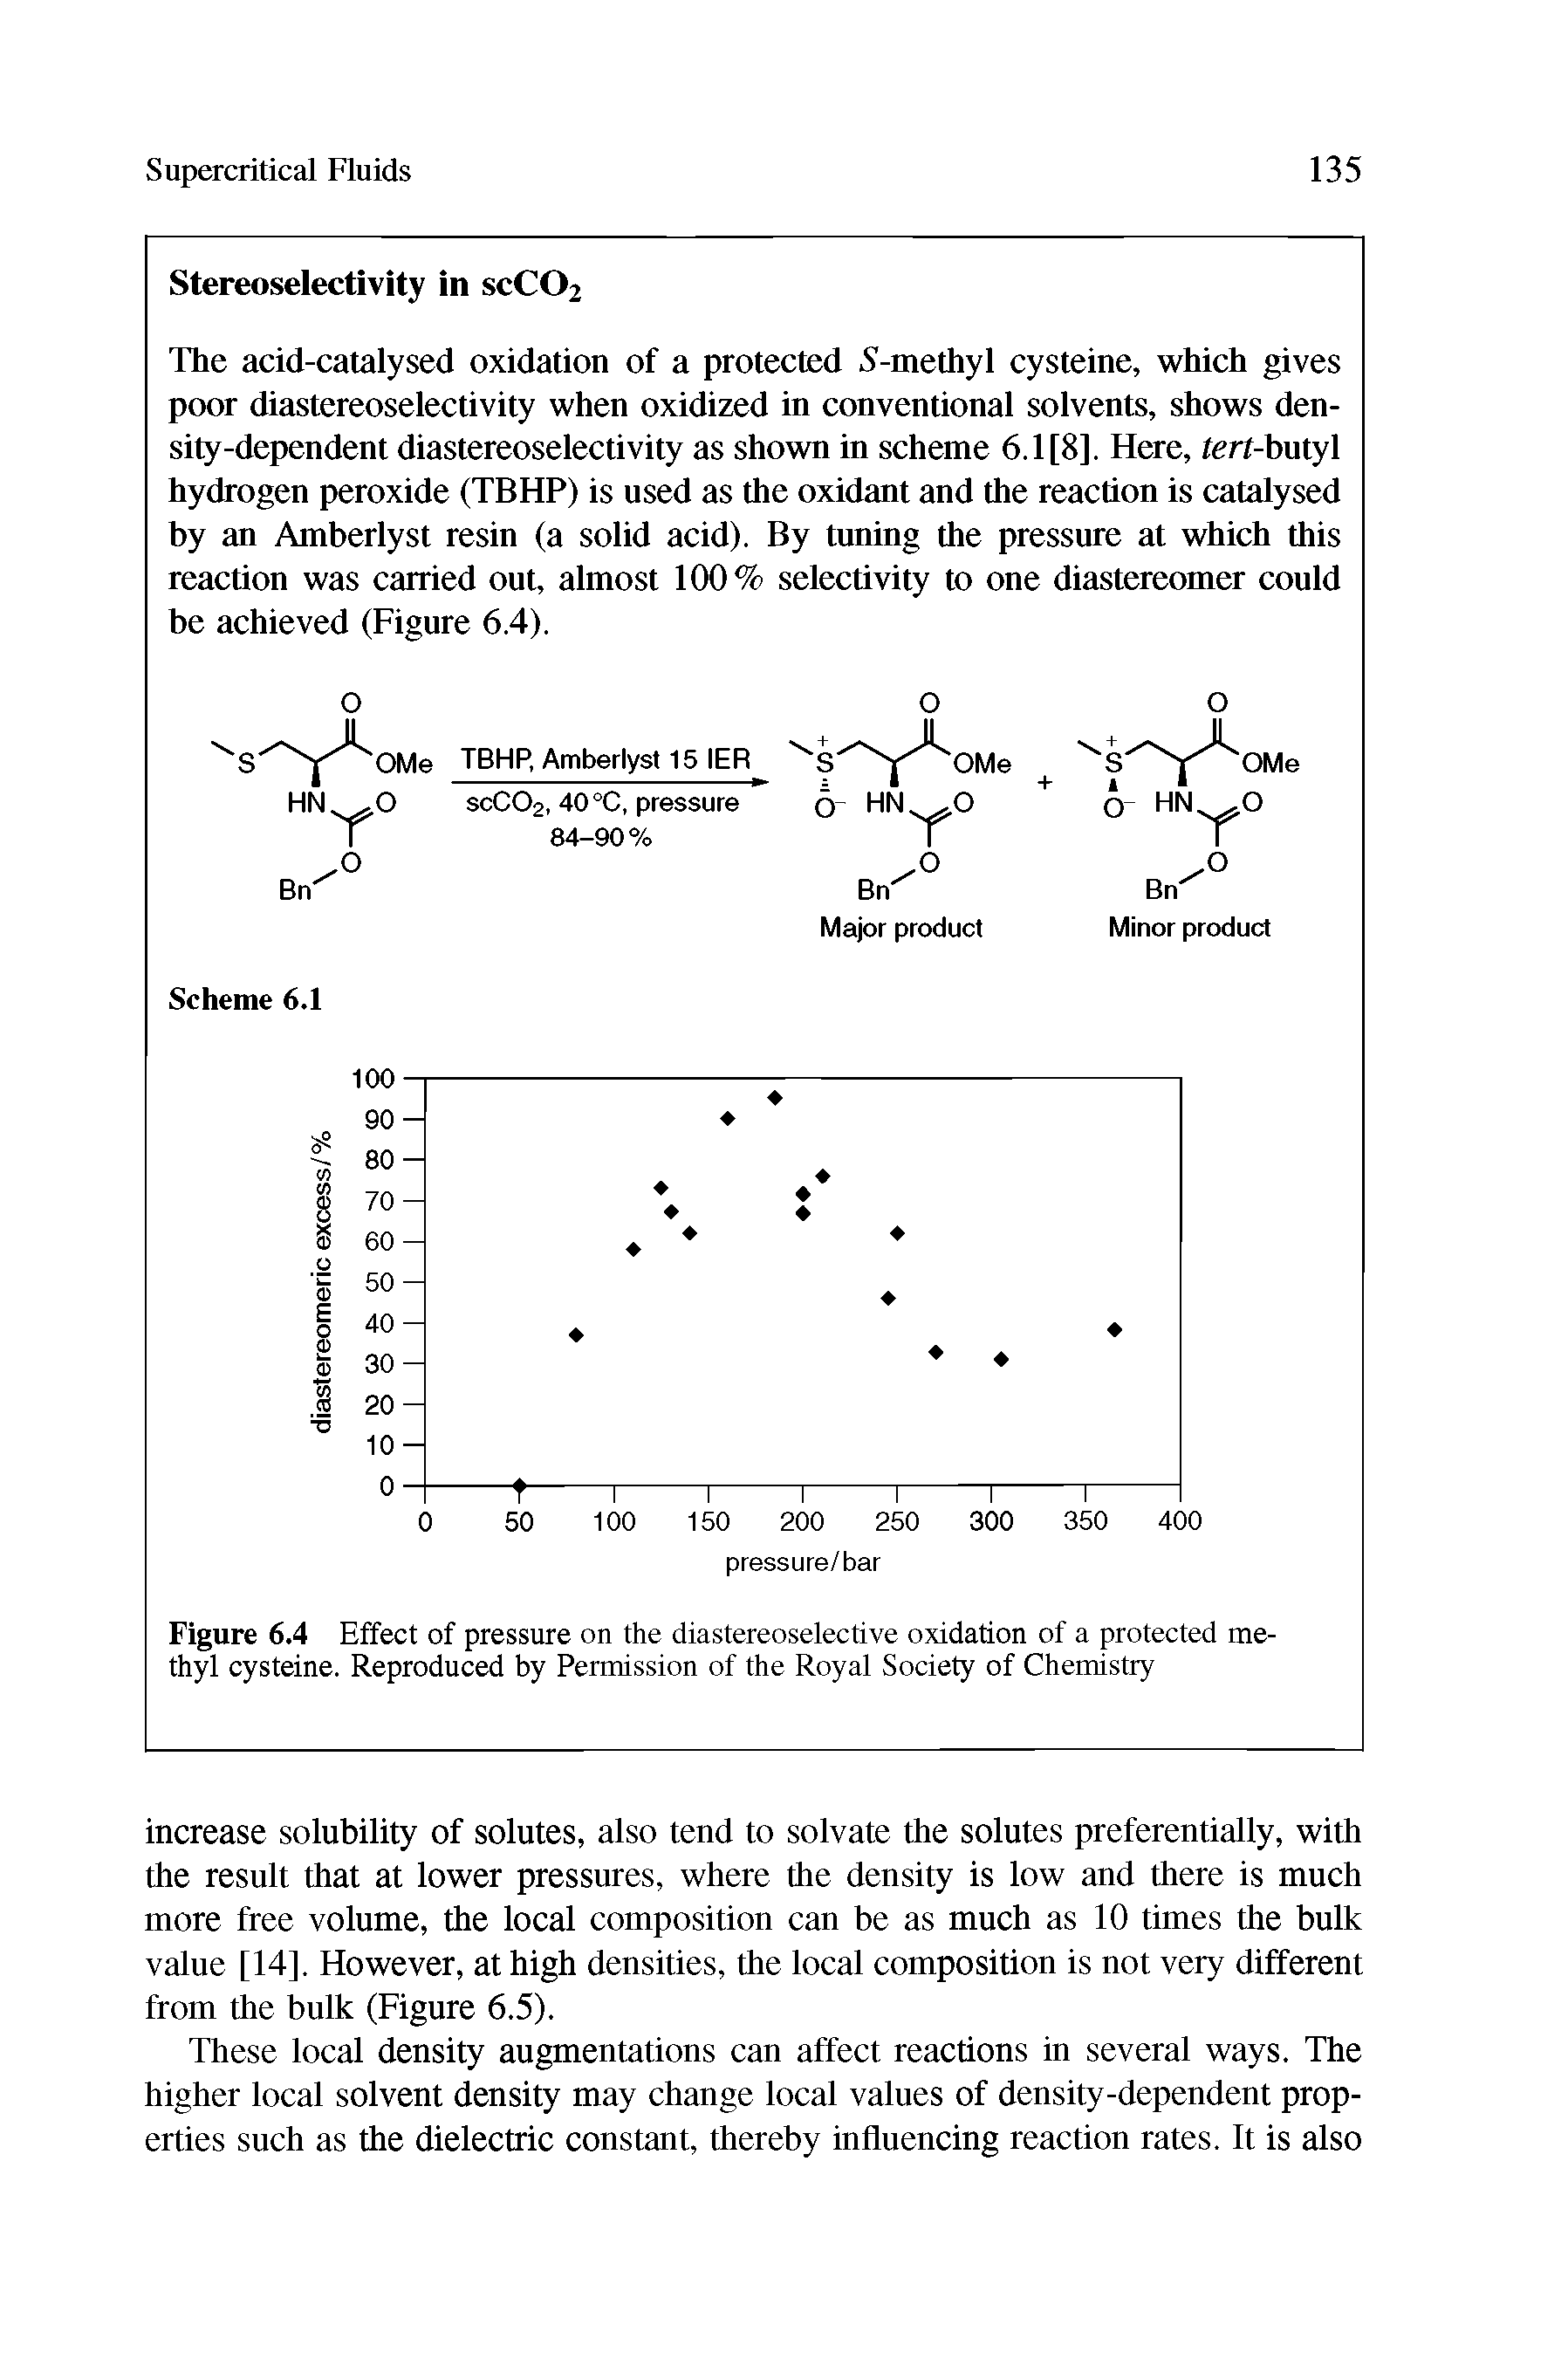 Figure 6.4 Effect of pressure on the diastereoselective oxidation of a protected methyl cysteine. Reproduced by Permission of the Royal Society of Chemistry...